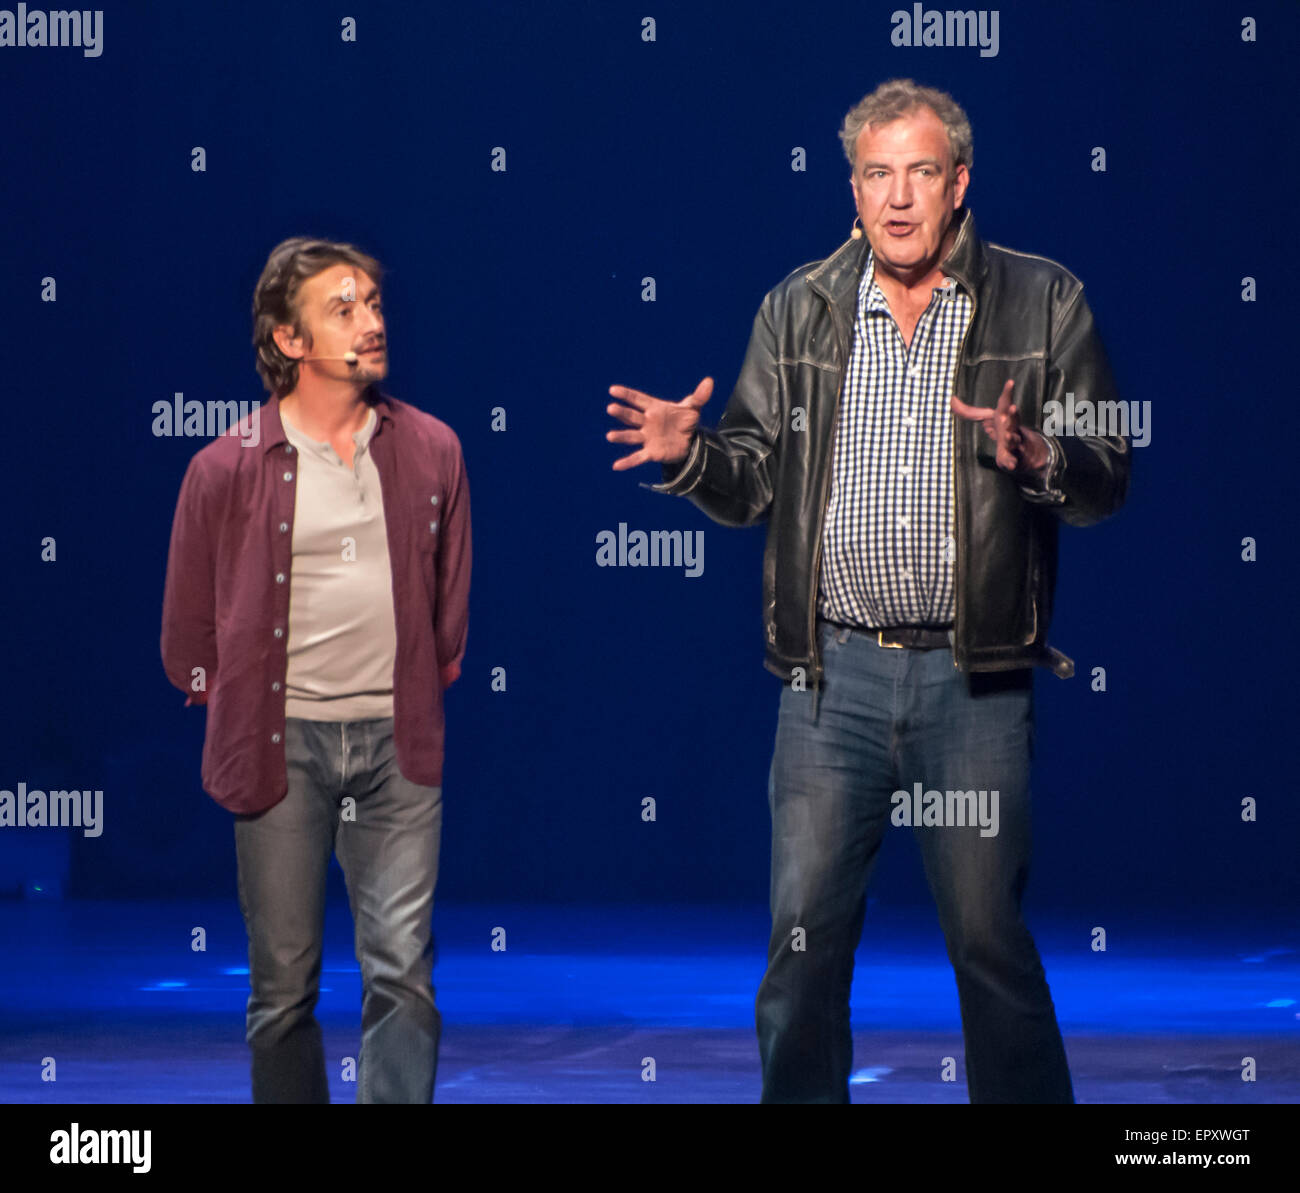 Belfast, Northern Ireland. 22 May 2015 - Clarkson, Hammond and May premier their car show Credit:  Stephen Barnes/Alamy Live News Stock Photo